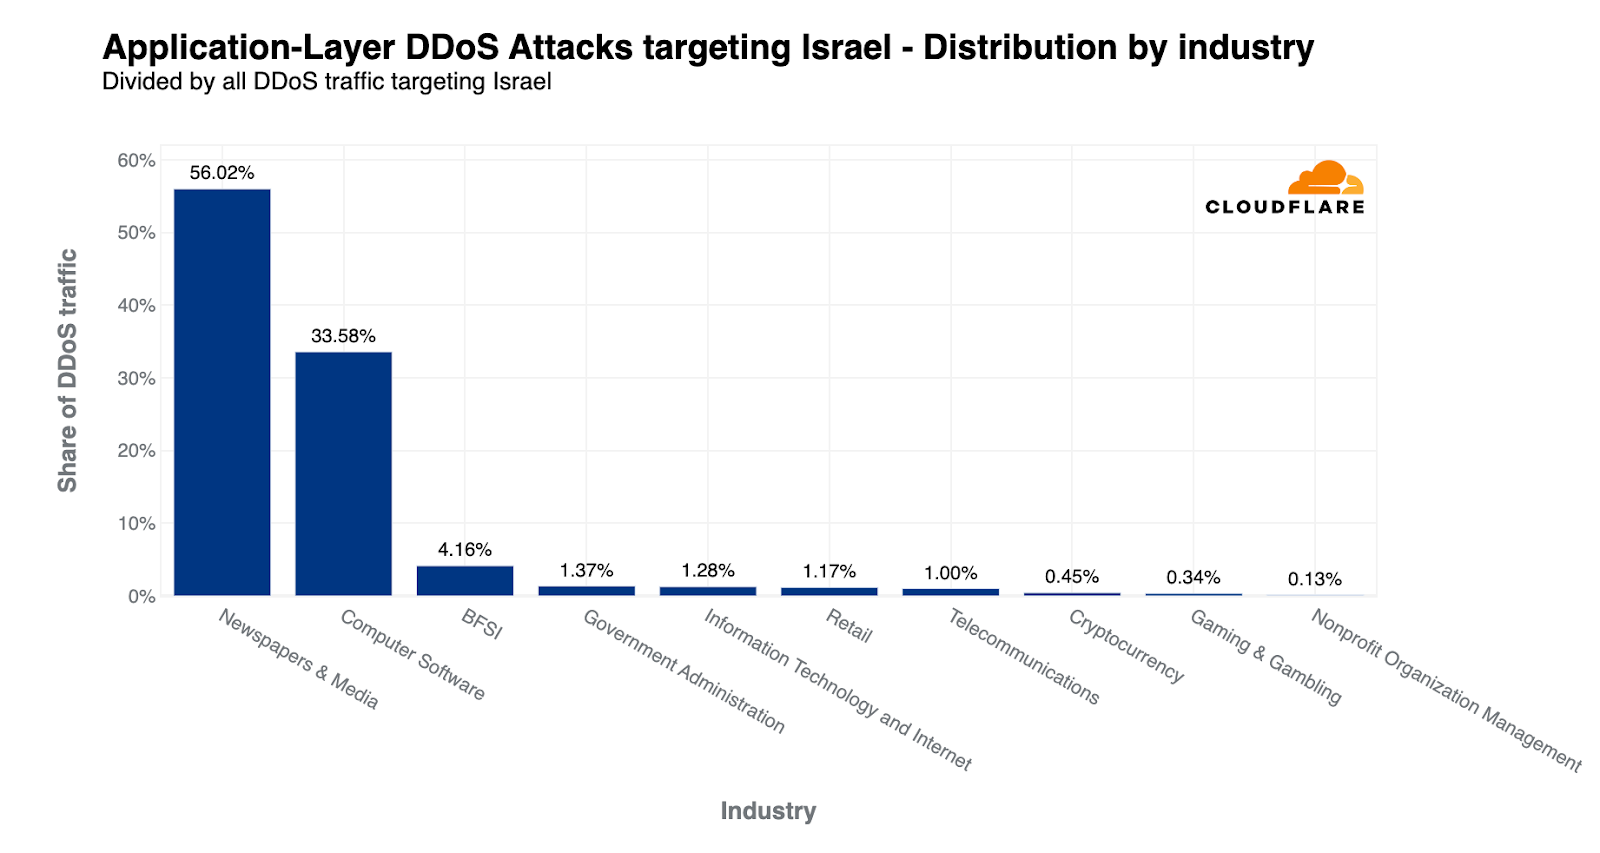 Top Israeli industries targeted by HTTP DDoS attacks